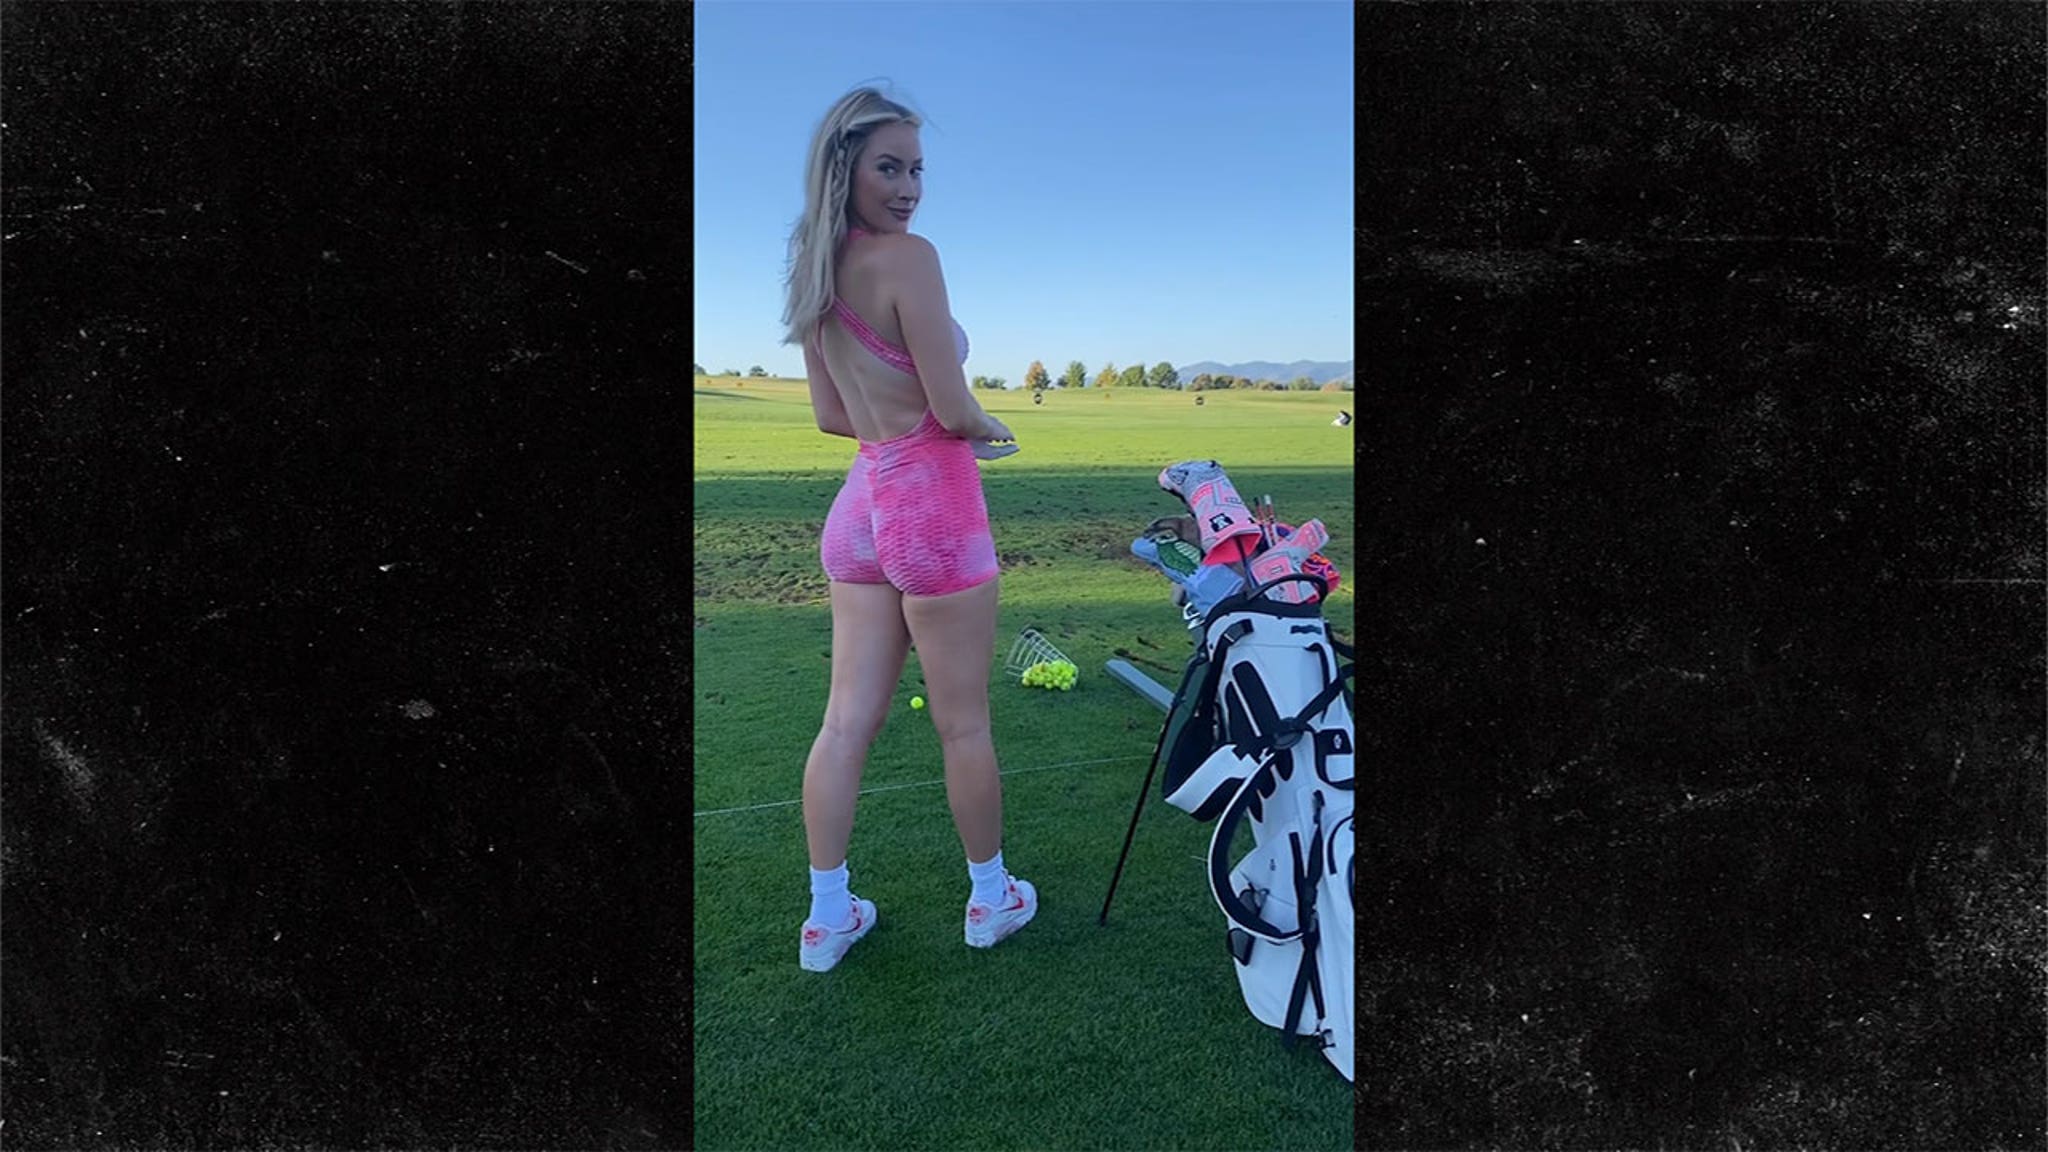 Golf Star Paige Spiranac Forced To Delete Social Media Comments Over